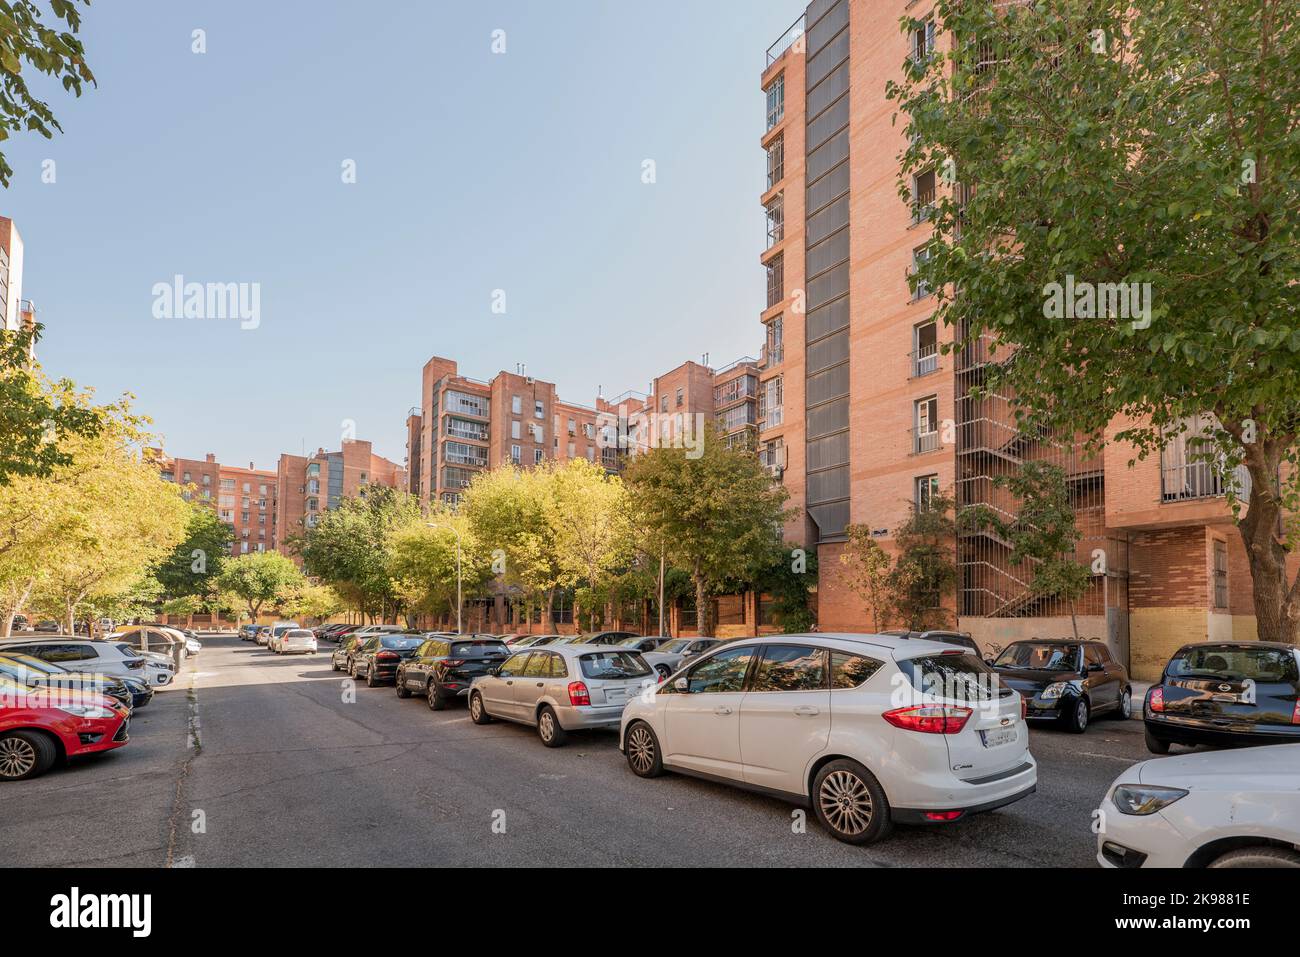 Facades of residential houses in urbanizations with many young trees and outdoor parking areas Stock Photo